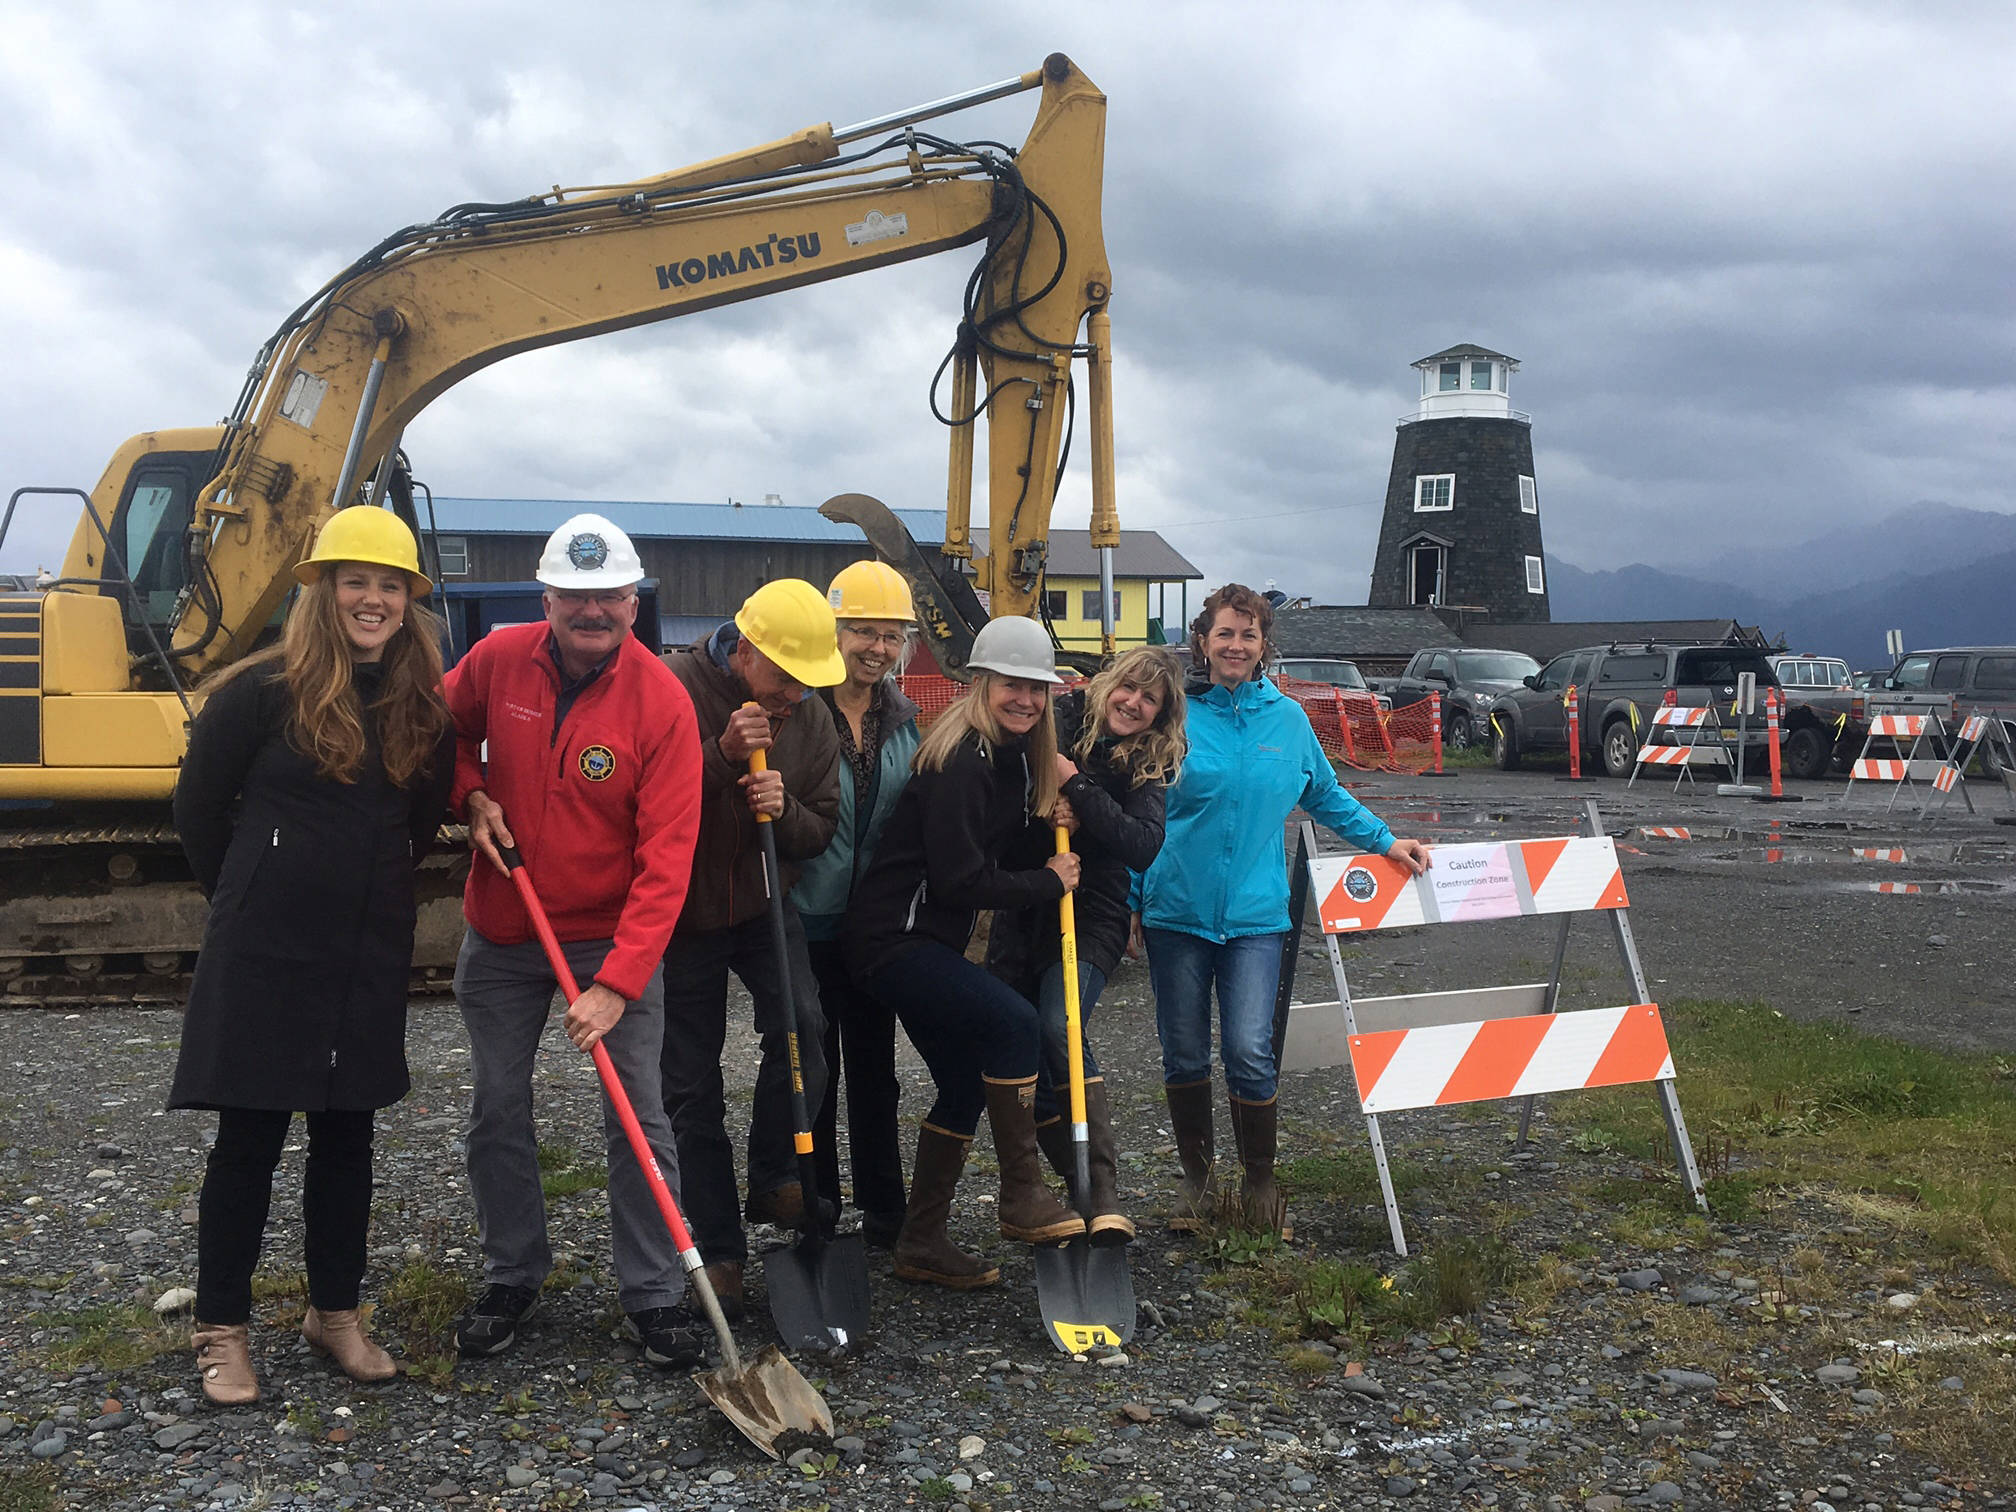 From left to right, Katie Koester, Bryan Hawkins, Gart Curtis, Joy Stewart, Polly Hess, Miranda Weiss and Denise Pitzman break ground on Sept. 6 for the start of The Boat House Maritime Pavillion on the Homer Spit at the site of the old harbormaster’s office. The concrete foundation already has been poured, Most work will be done this fall. (Photo provided)